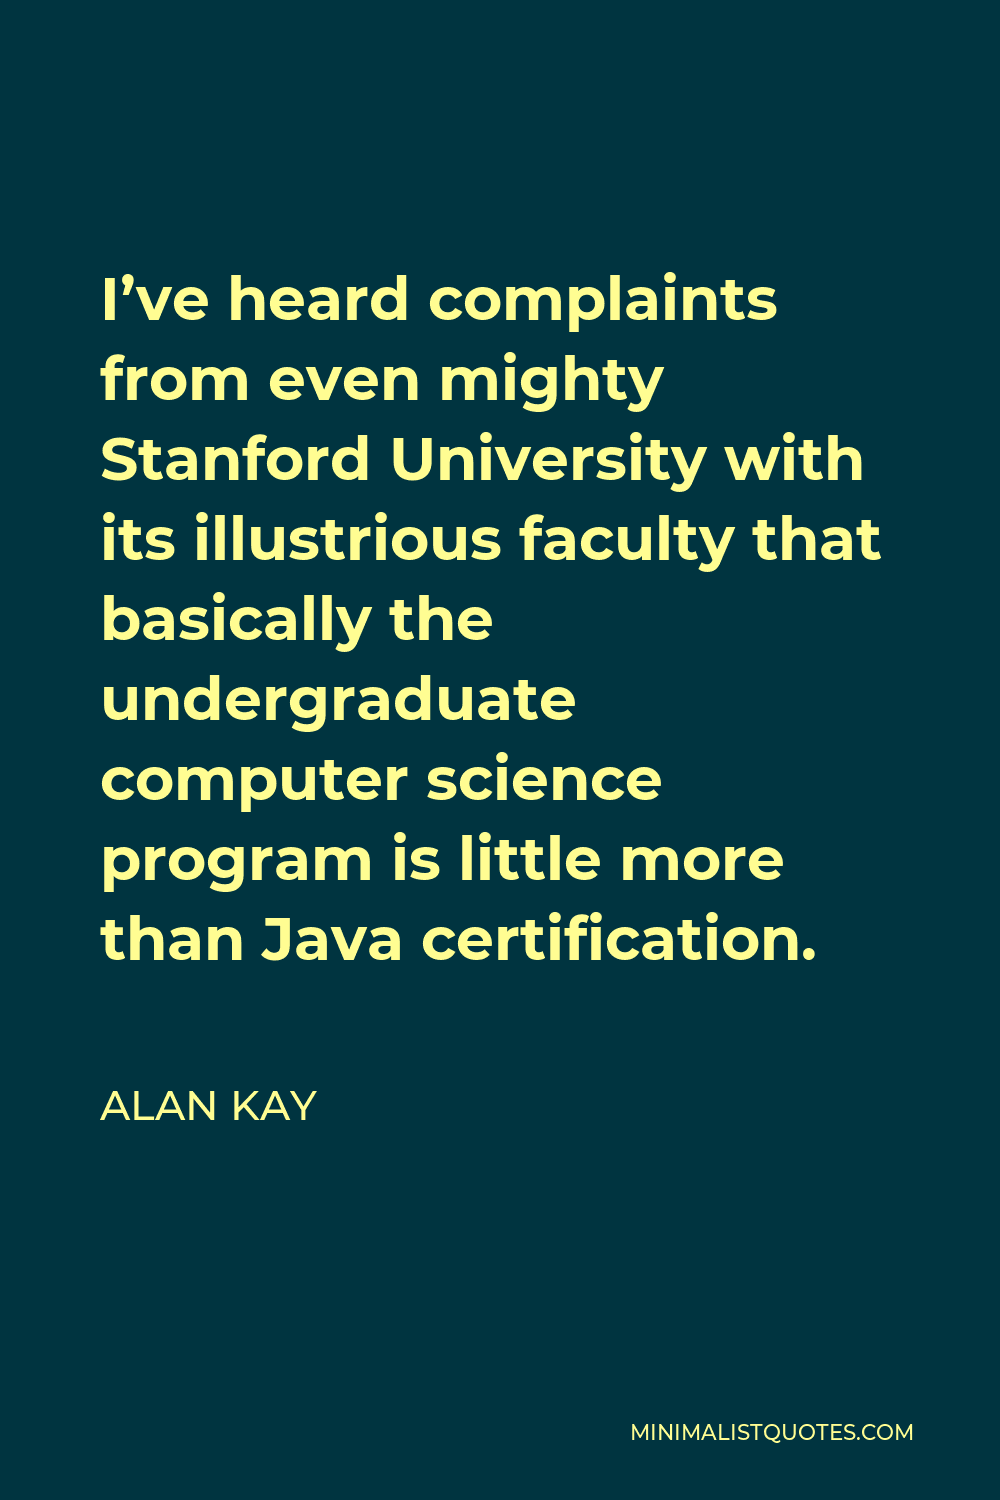 Alan Kay Quote - I’ve heard complaints from even mighty Stanford University with its illustrious faculty that basically the undergraduate computer science program is little more than Java certification.